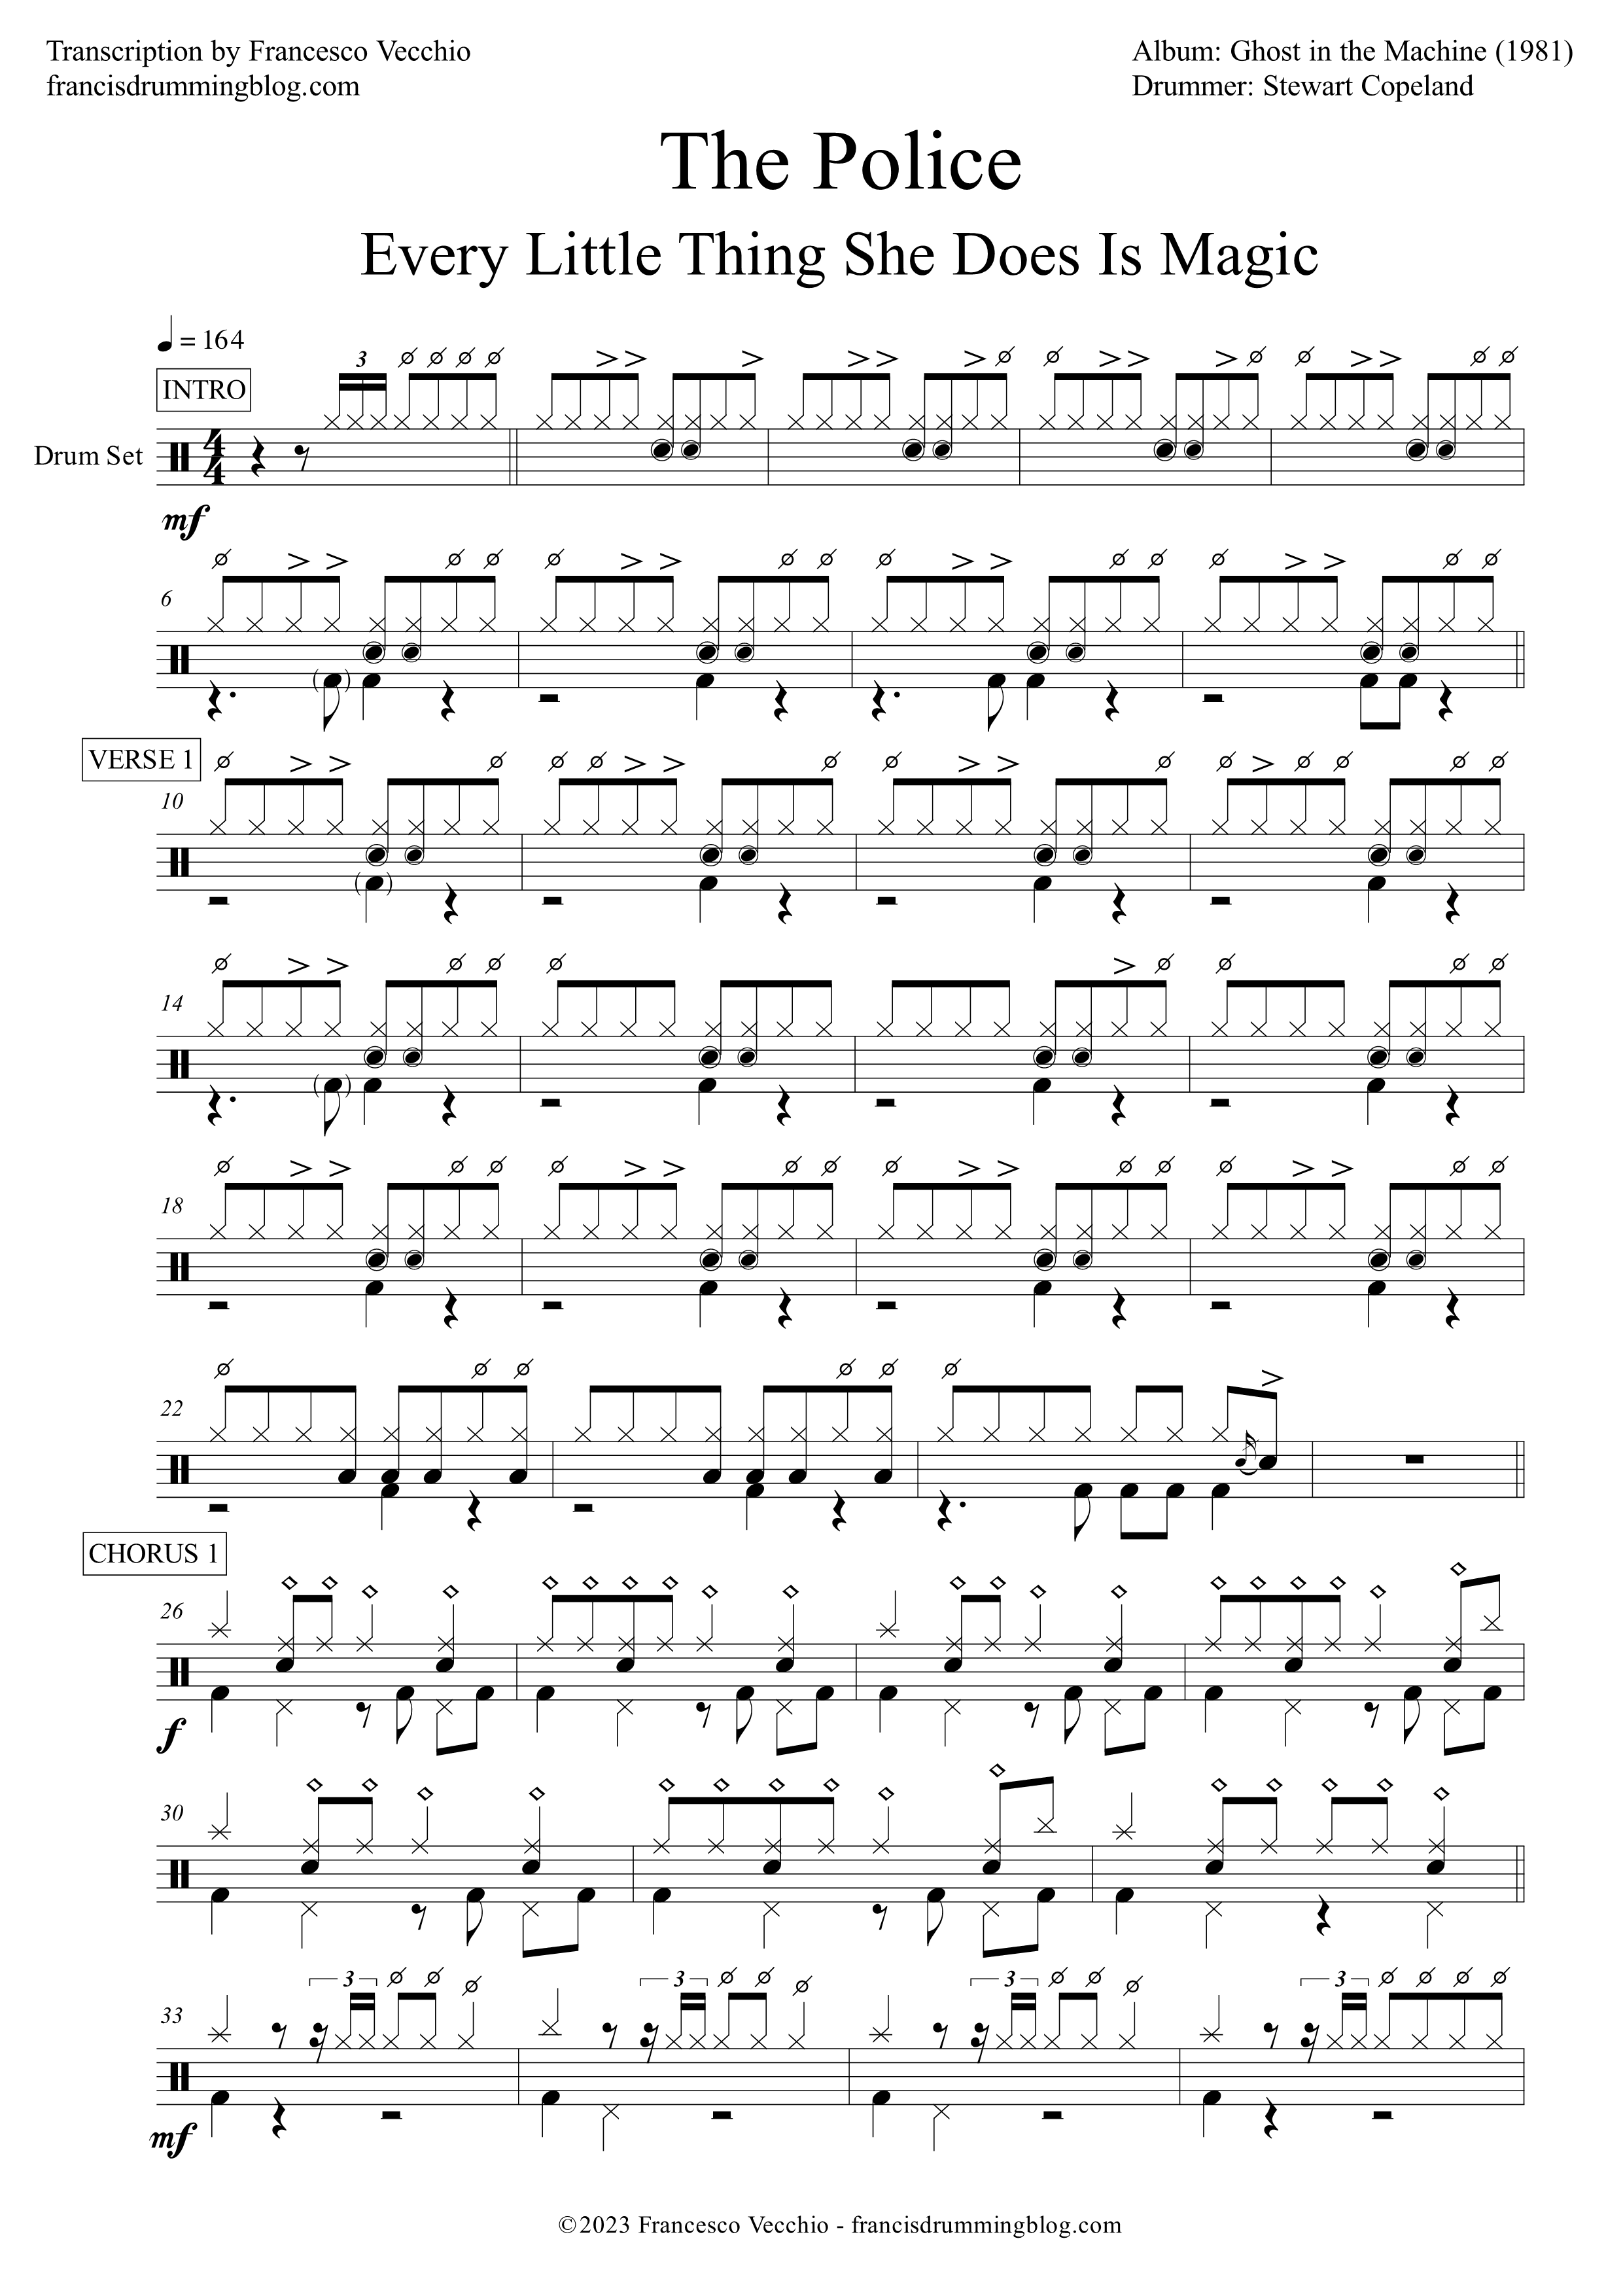 the police every little thing she does is magic drum transcription